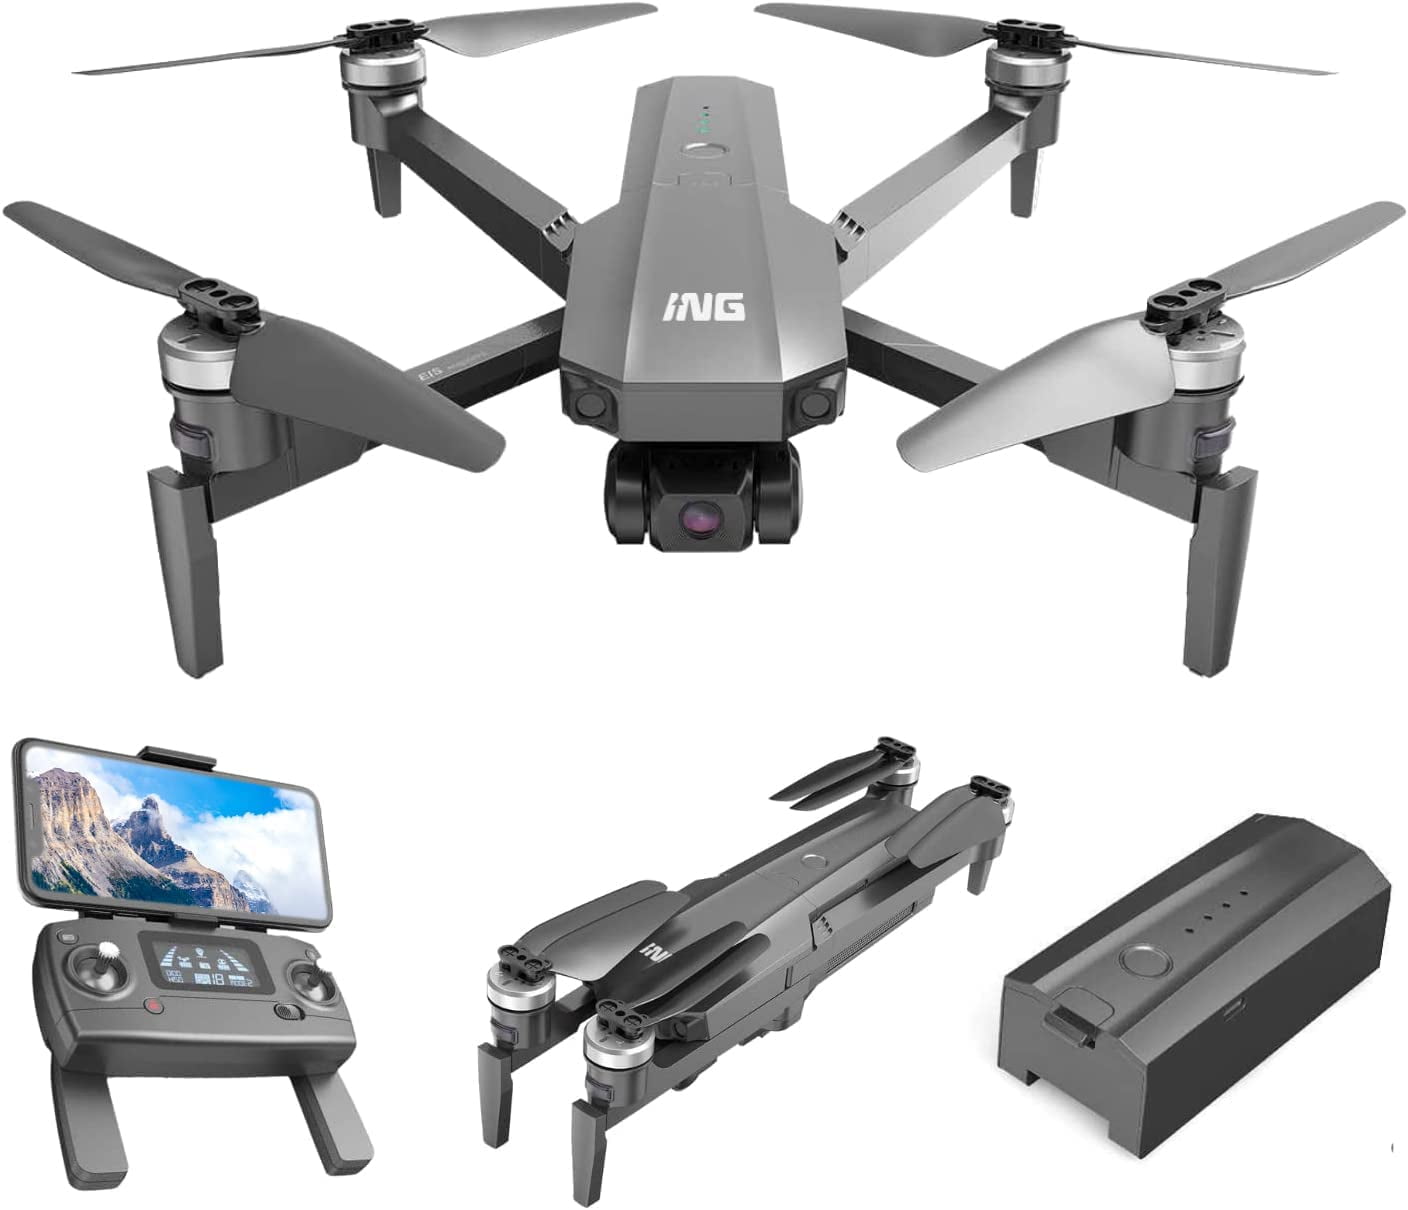 Beantech GPS Drone 4K UHD EIS Camera for Adults, 5G Transmission Drones with Brushless Motor, Follow Me, Auto Return Home, Encircling Flight Quadcopter with 3-Axis Gimbal - Walmart.com